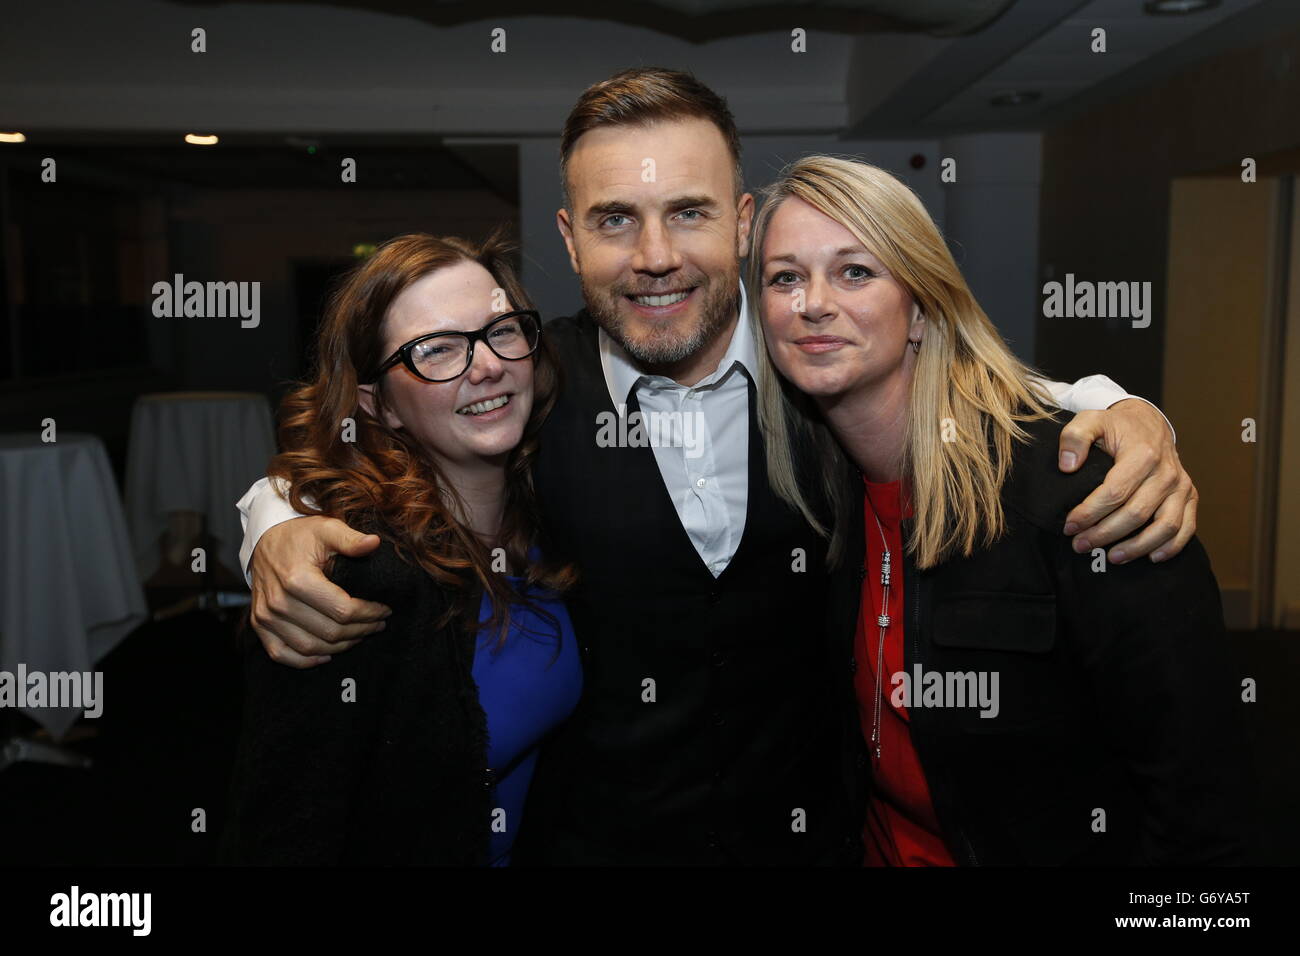 Gary Barlow with fans (names not given) before performing an intimate gig at Under the Bridge, Stamford Bridge, London for Heart FM listeners and sponsored by Boots. Stock Photo